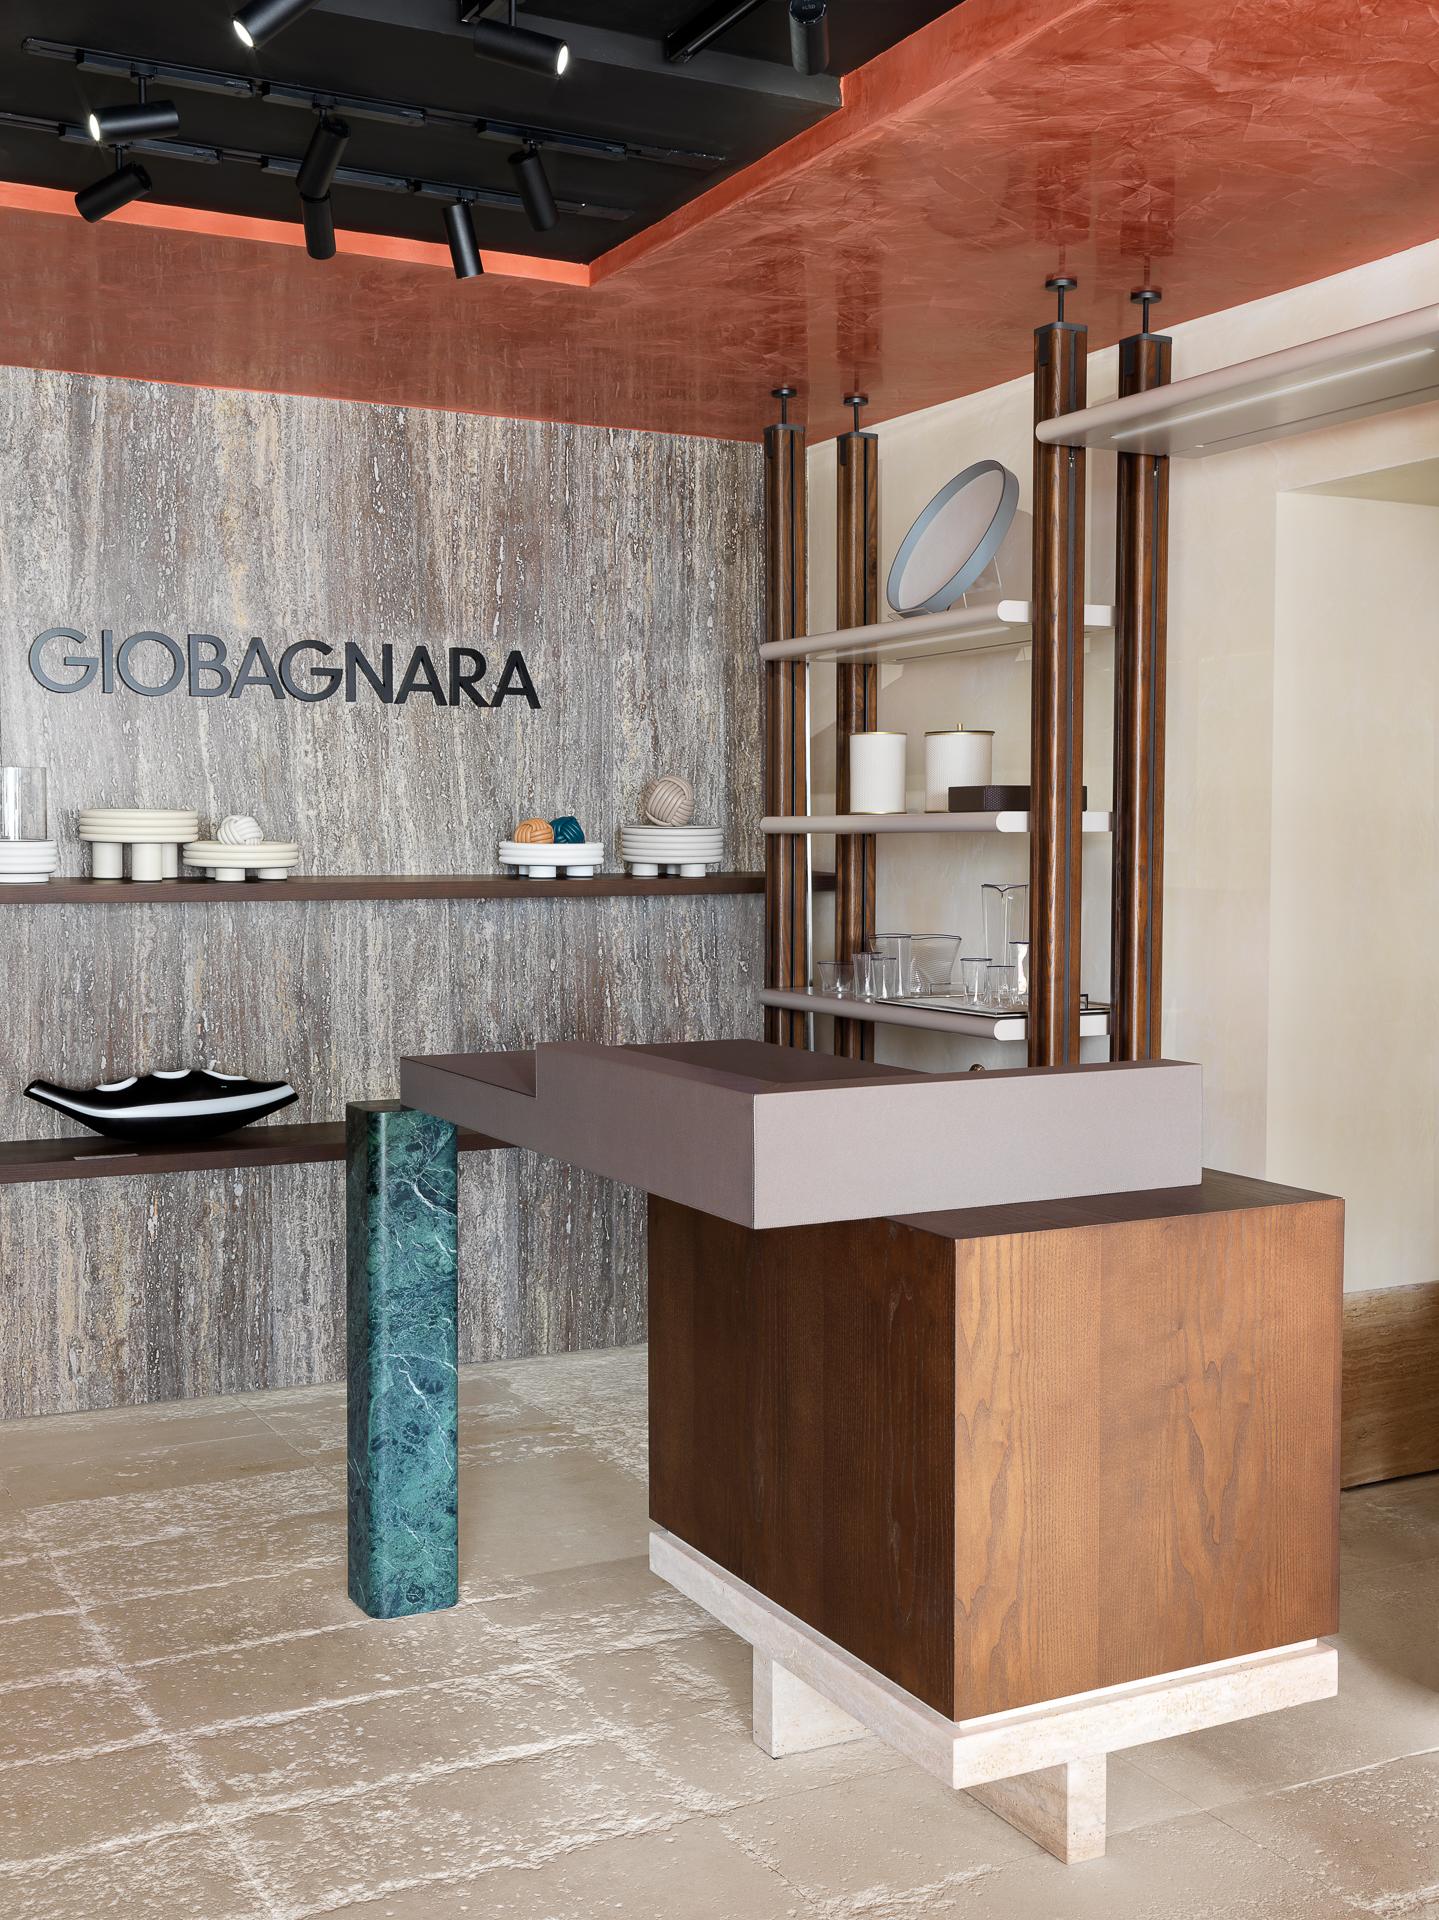 GIOBAGNARA
Renowned for its elegant creations that convey luxury
without ostentation, GIOBAGNARA adheres to the
highest standards of craftsmanship. By pursuing
a philosophy that incorporates traditional know-
how with leading-edge technologies, and